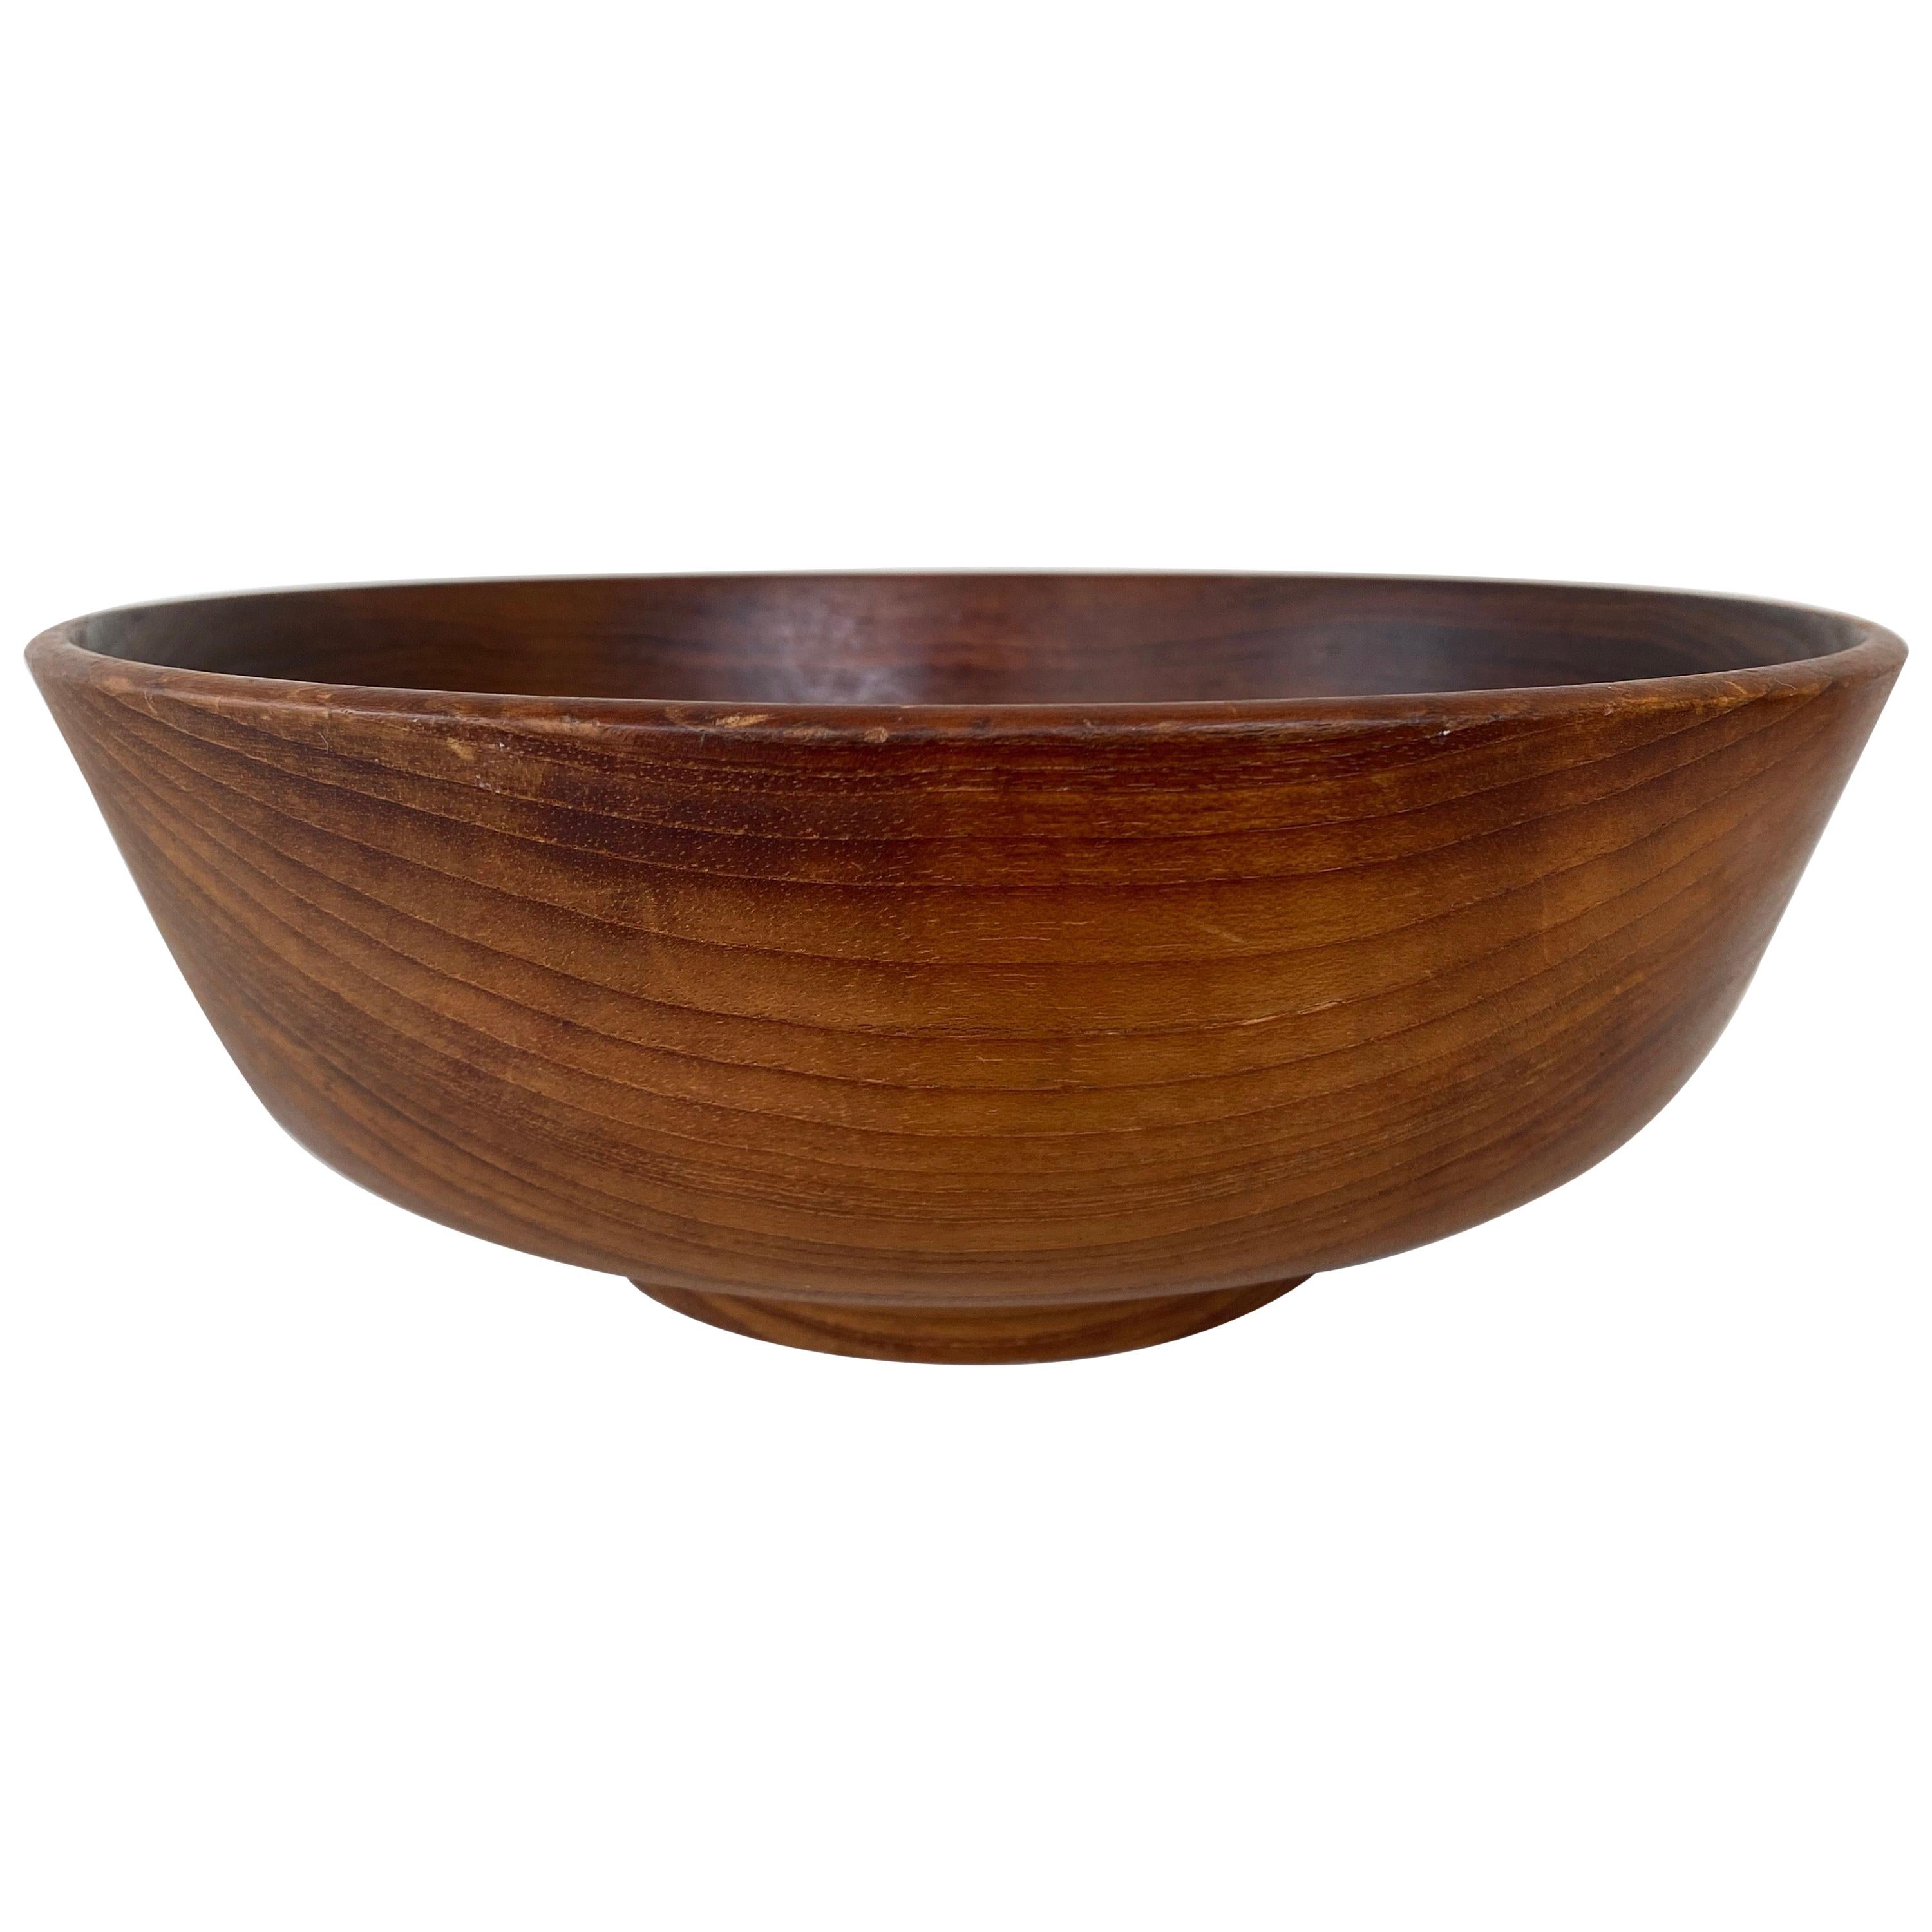 Bob Stocksdale Teak Turned Wood Bowl with Exceptional Grain Pattern, Early 1970s For Sale